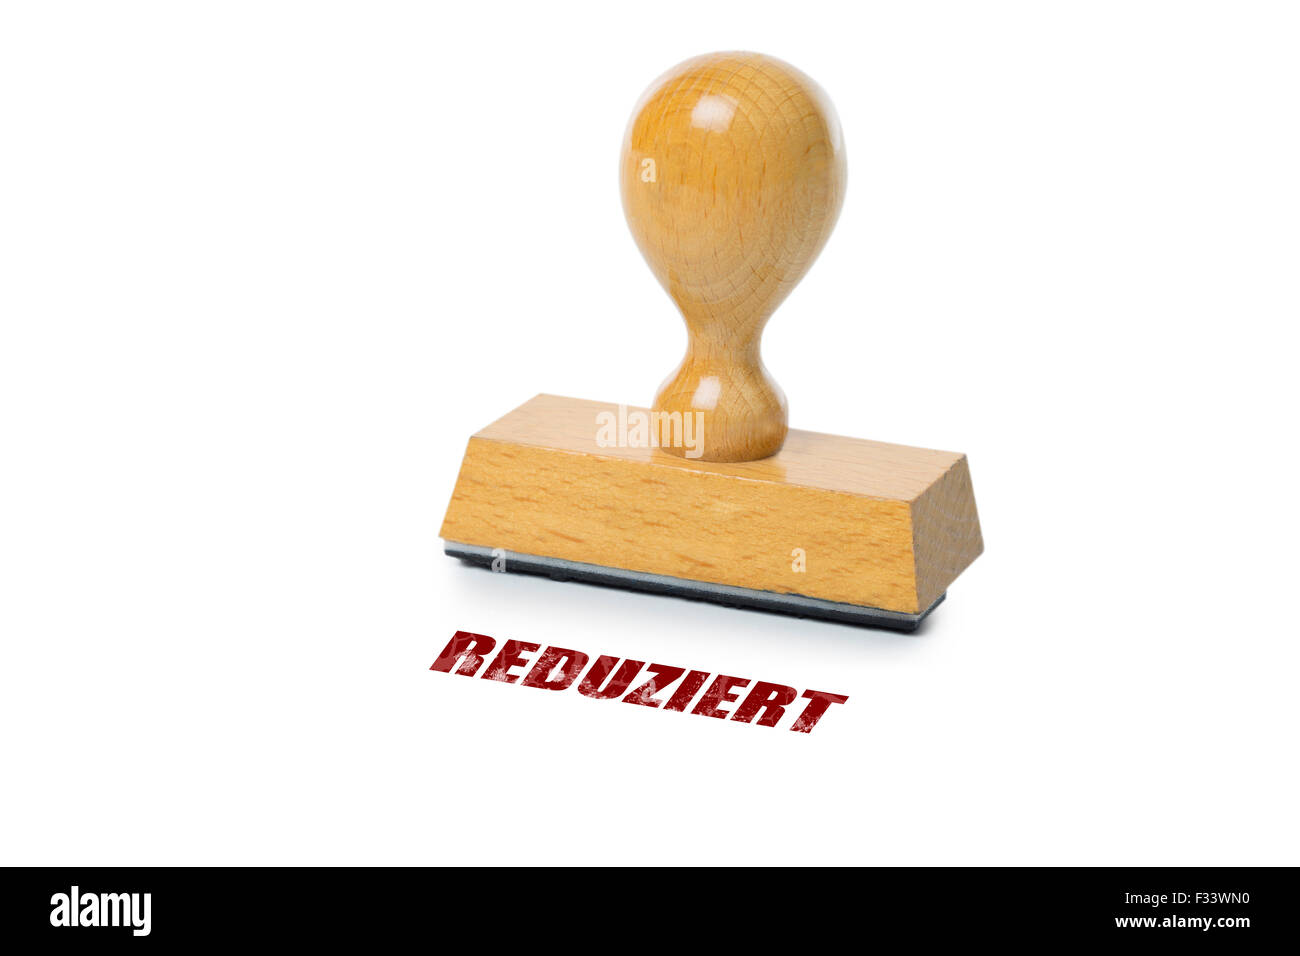 Reduziert (German Reduced) printed in red ink with wooden Rubber stamp isolated on white background Stock Photo